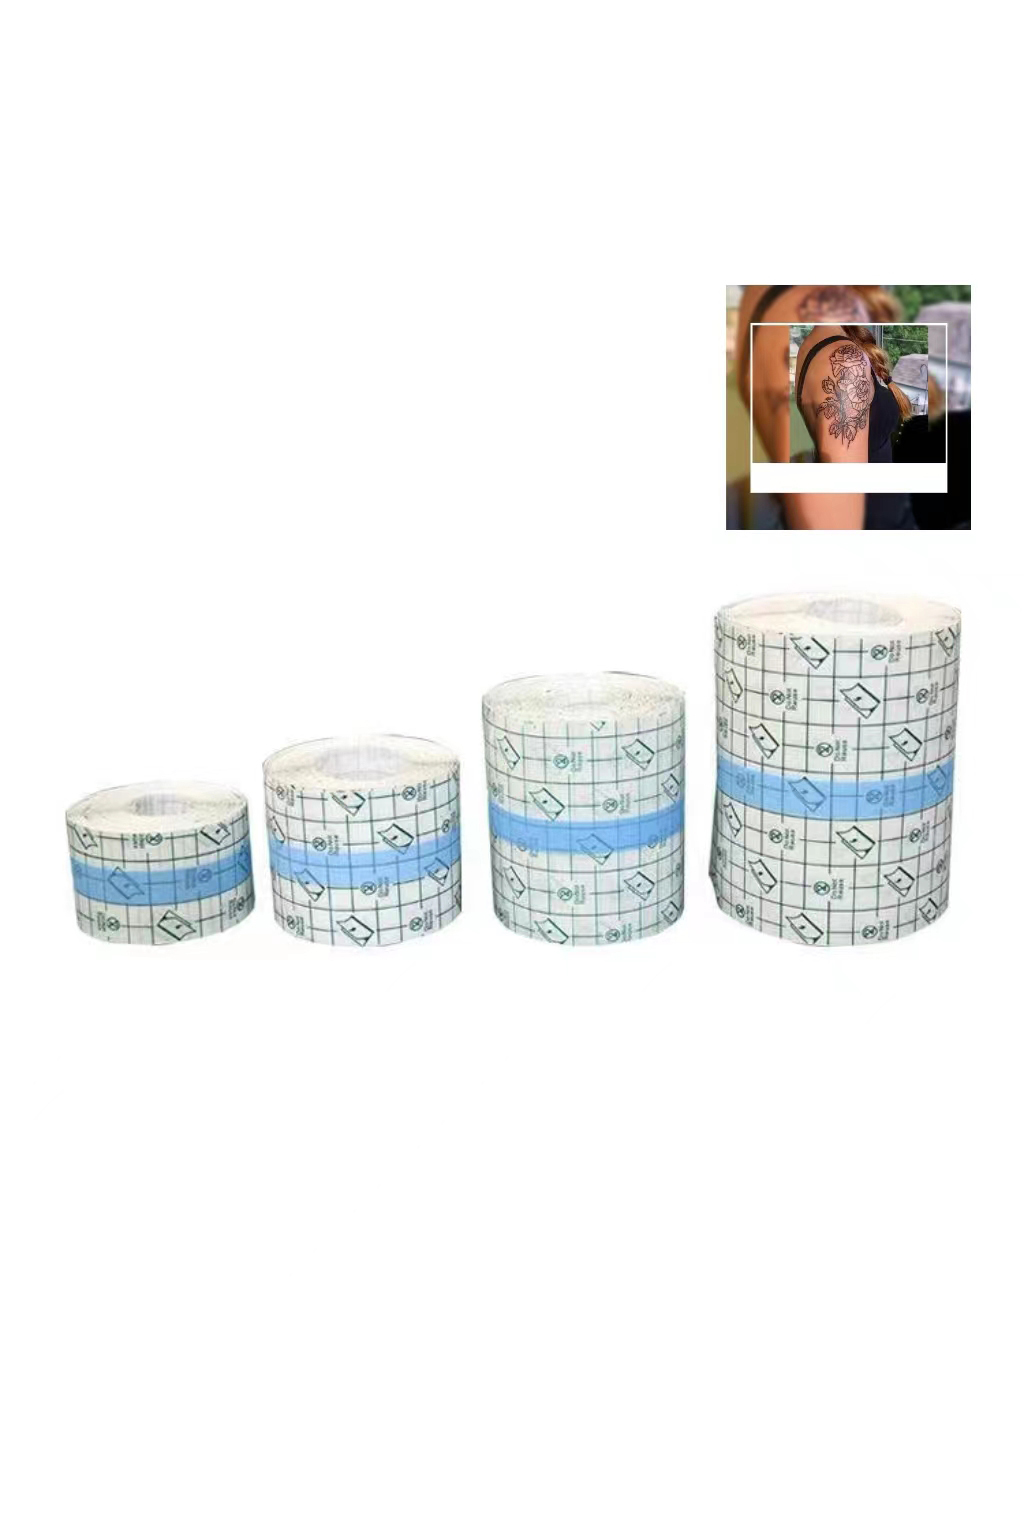 1 Roll Transparent Adhesive Wrap Tattoo Aftercare Bandage